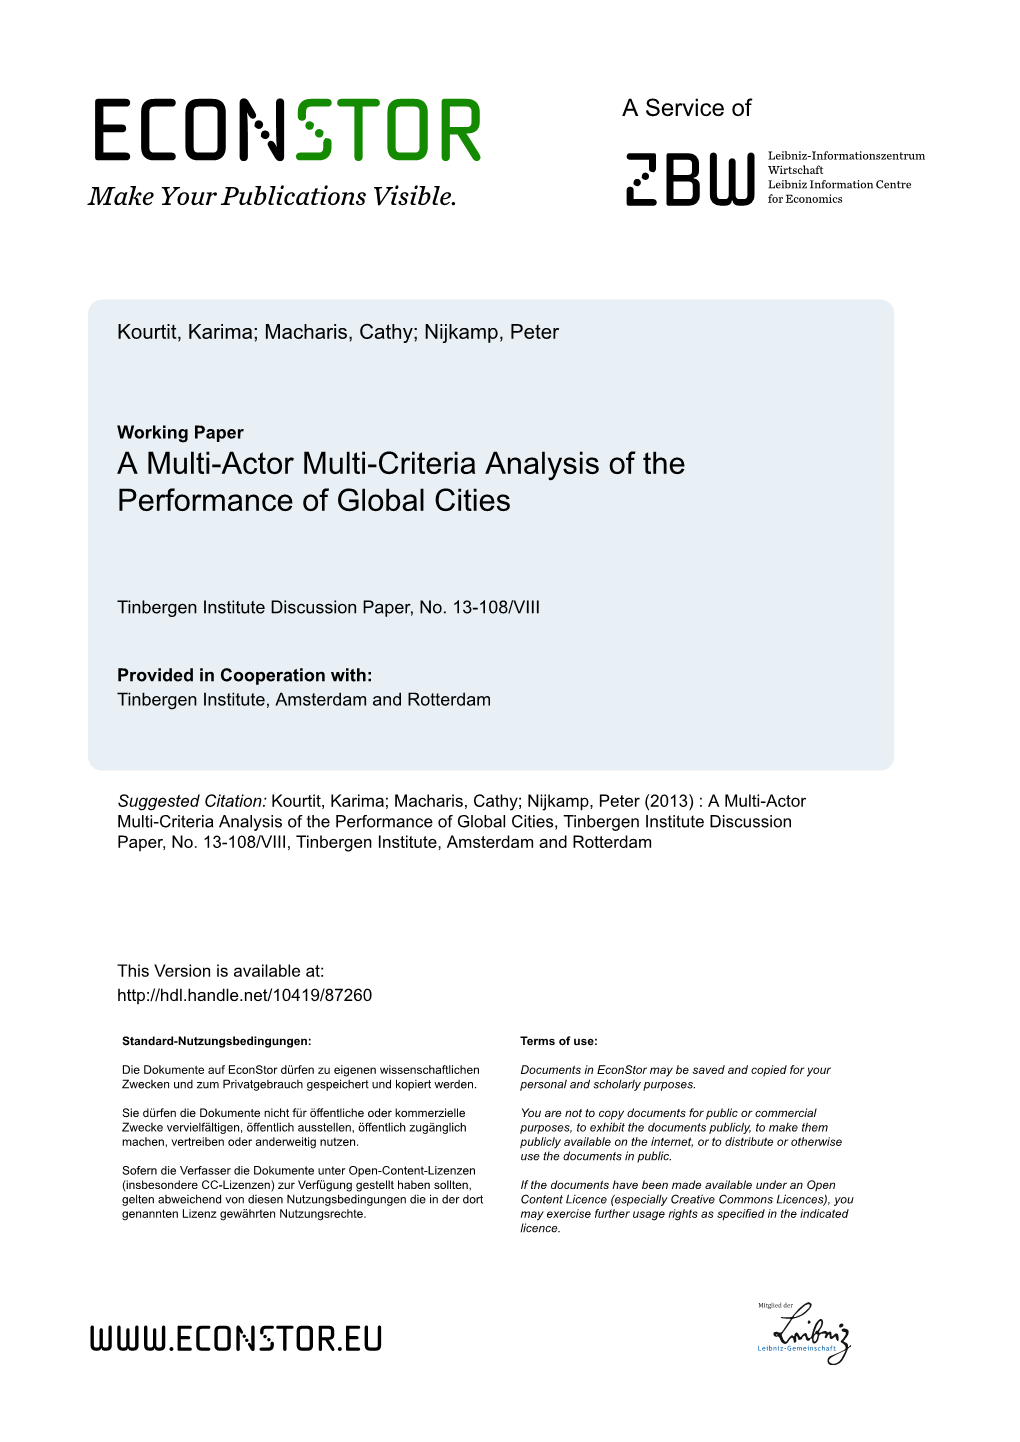 A Multi-Actor Multi-Criteria Analysis of the Performance of Global Cities